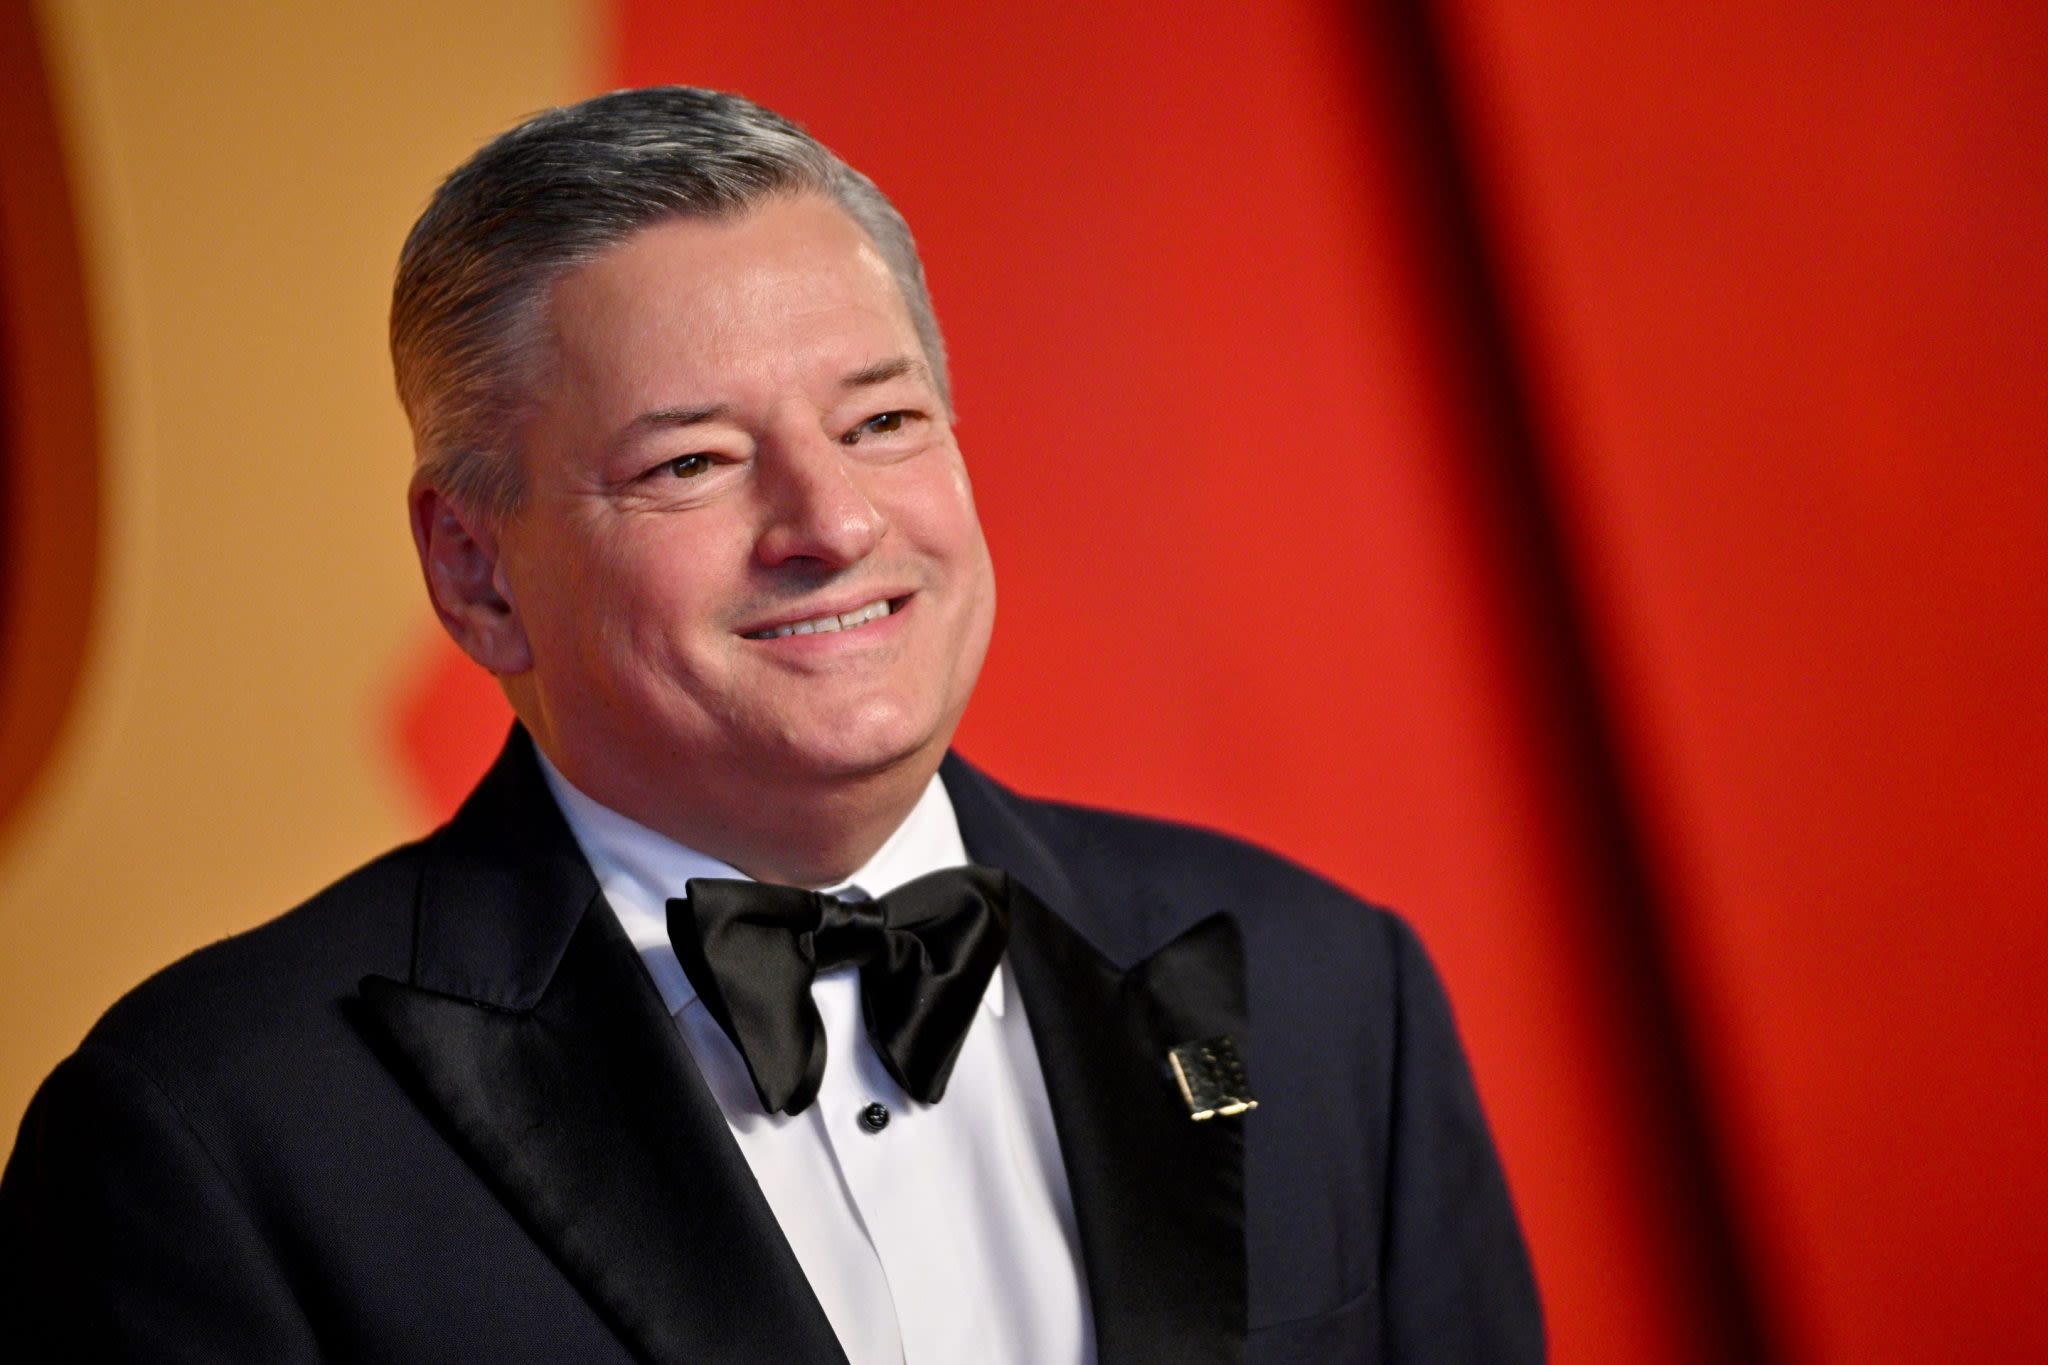 Netflix CEO Ted Sarandos says showrunners and screenwriters better start using AI—or else someone who does will take their job